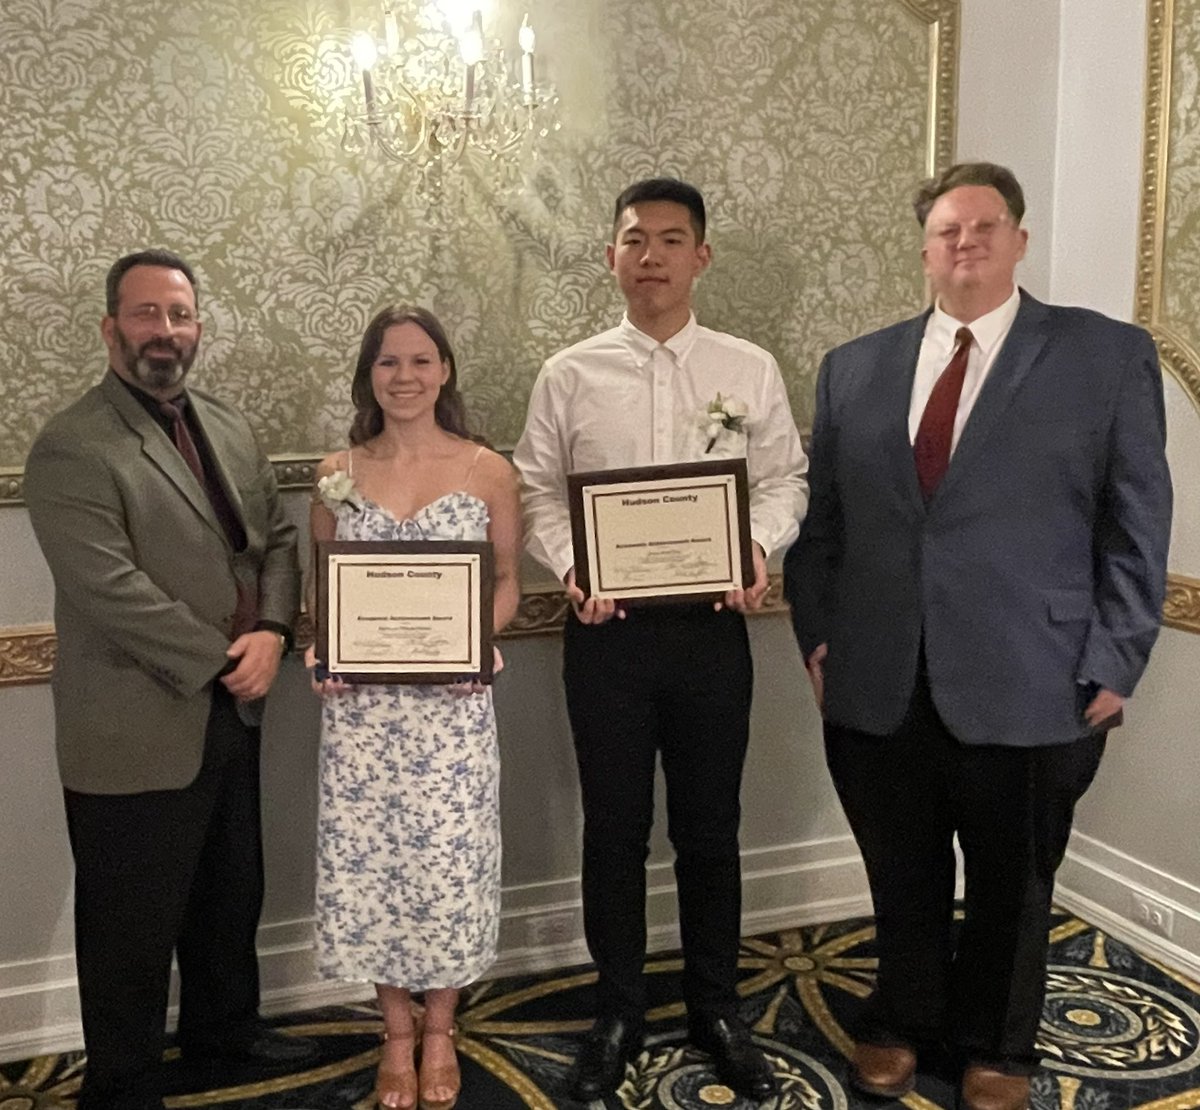 Thank you @HudsonCoNJDOE for a lovely evening honoring our exceptional @WeehawkenTSD Valedictorian & Salutatorian Katie Hinton and Jason Yao. Congratulations to all the other wonderful students!!!! @RobFerullo4 @FAmato53 @EricCrespoEDU @StefanieCirill1 @MsMonty207 @EDUwithAriel